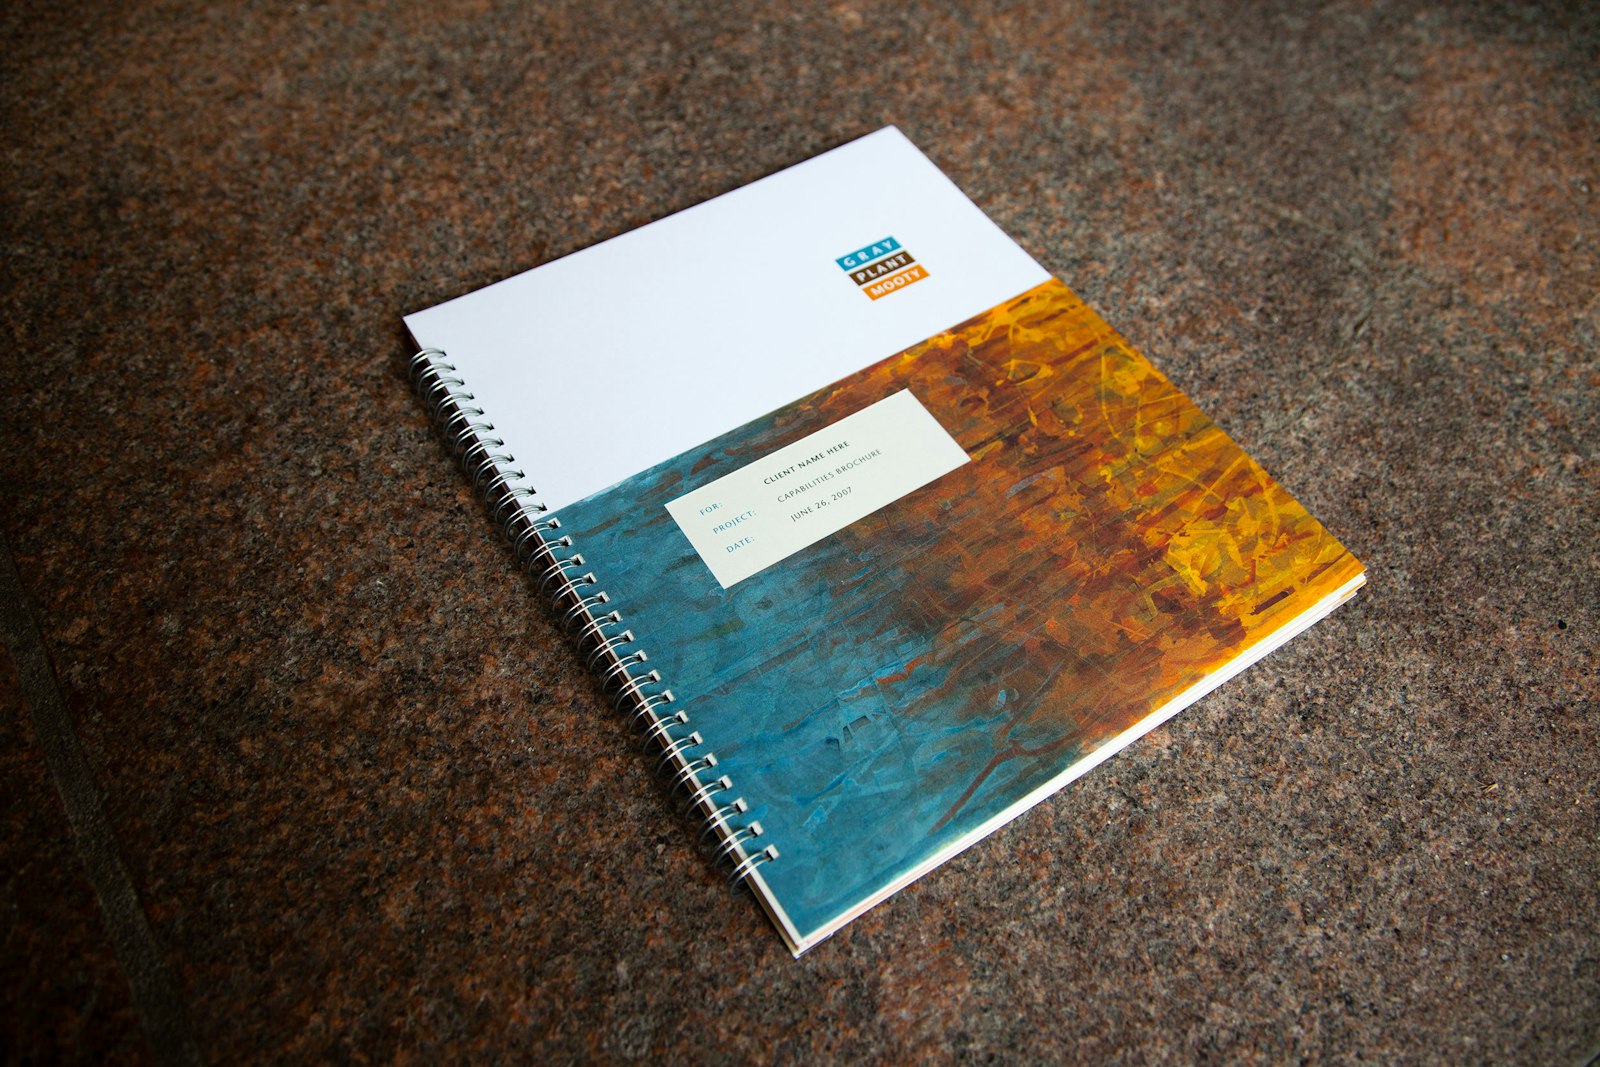 A Gray Plant Mooty branded capabilities brochure booklet.